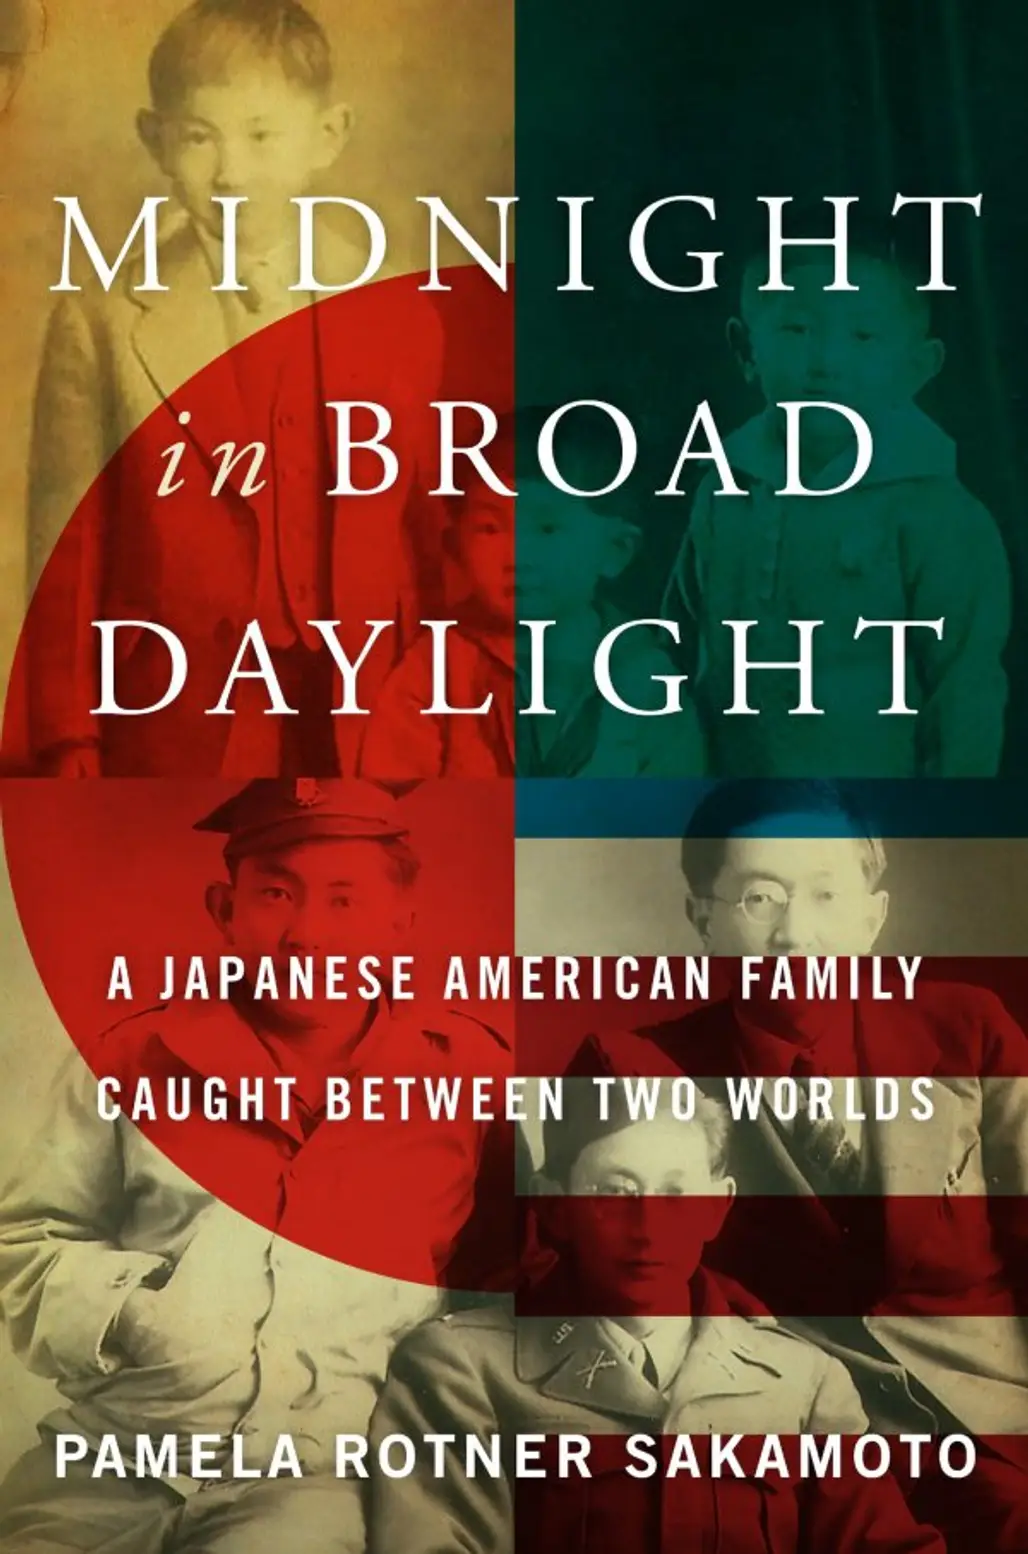 Midnight in Broad Daylight: a Japanese American Family Caught between Two Worlds by Pamela Rotner Sakamoto